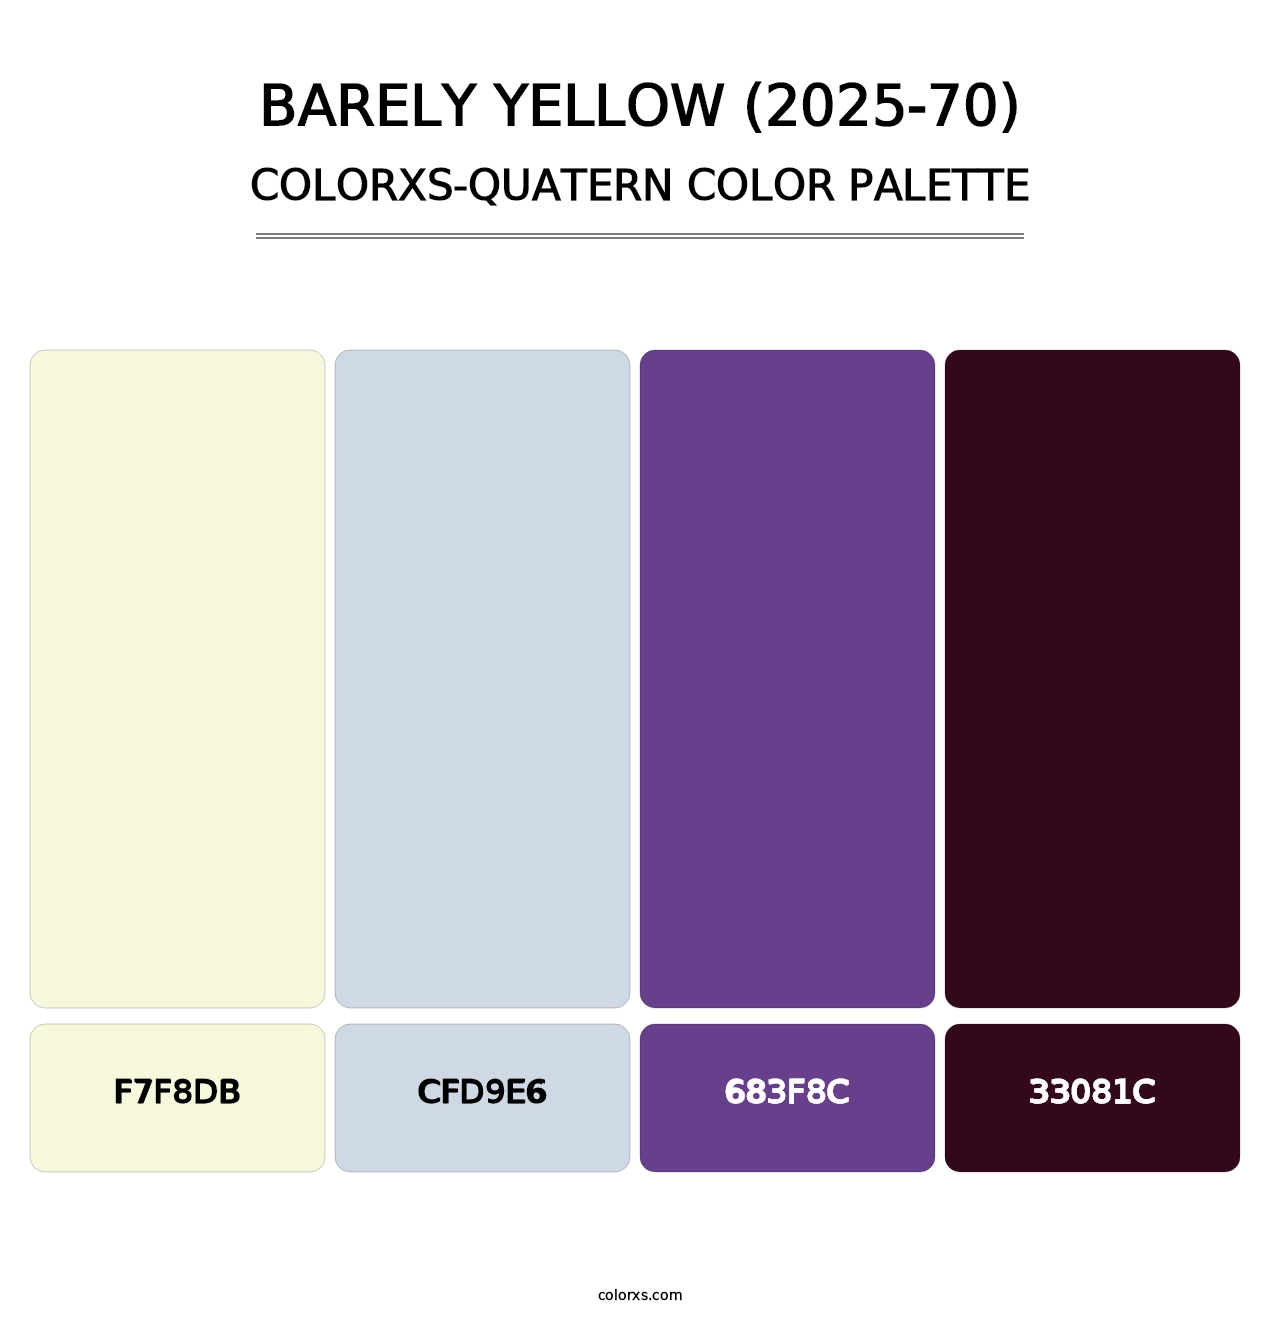 Barely Yellow (2025-70) - Colorxs Quatern Palette